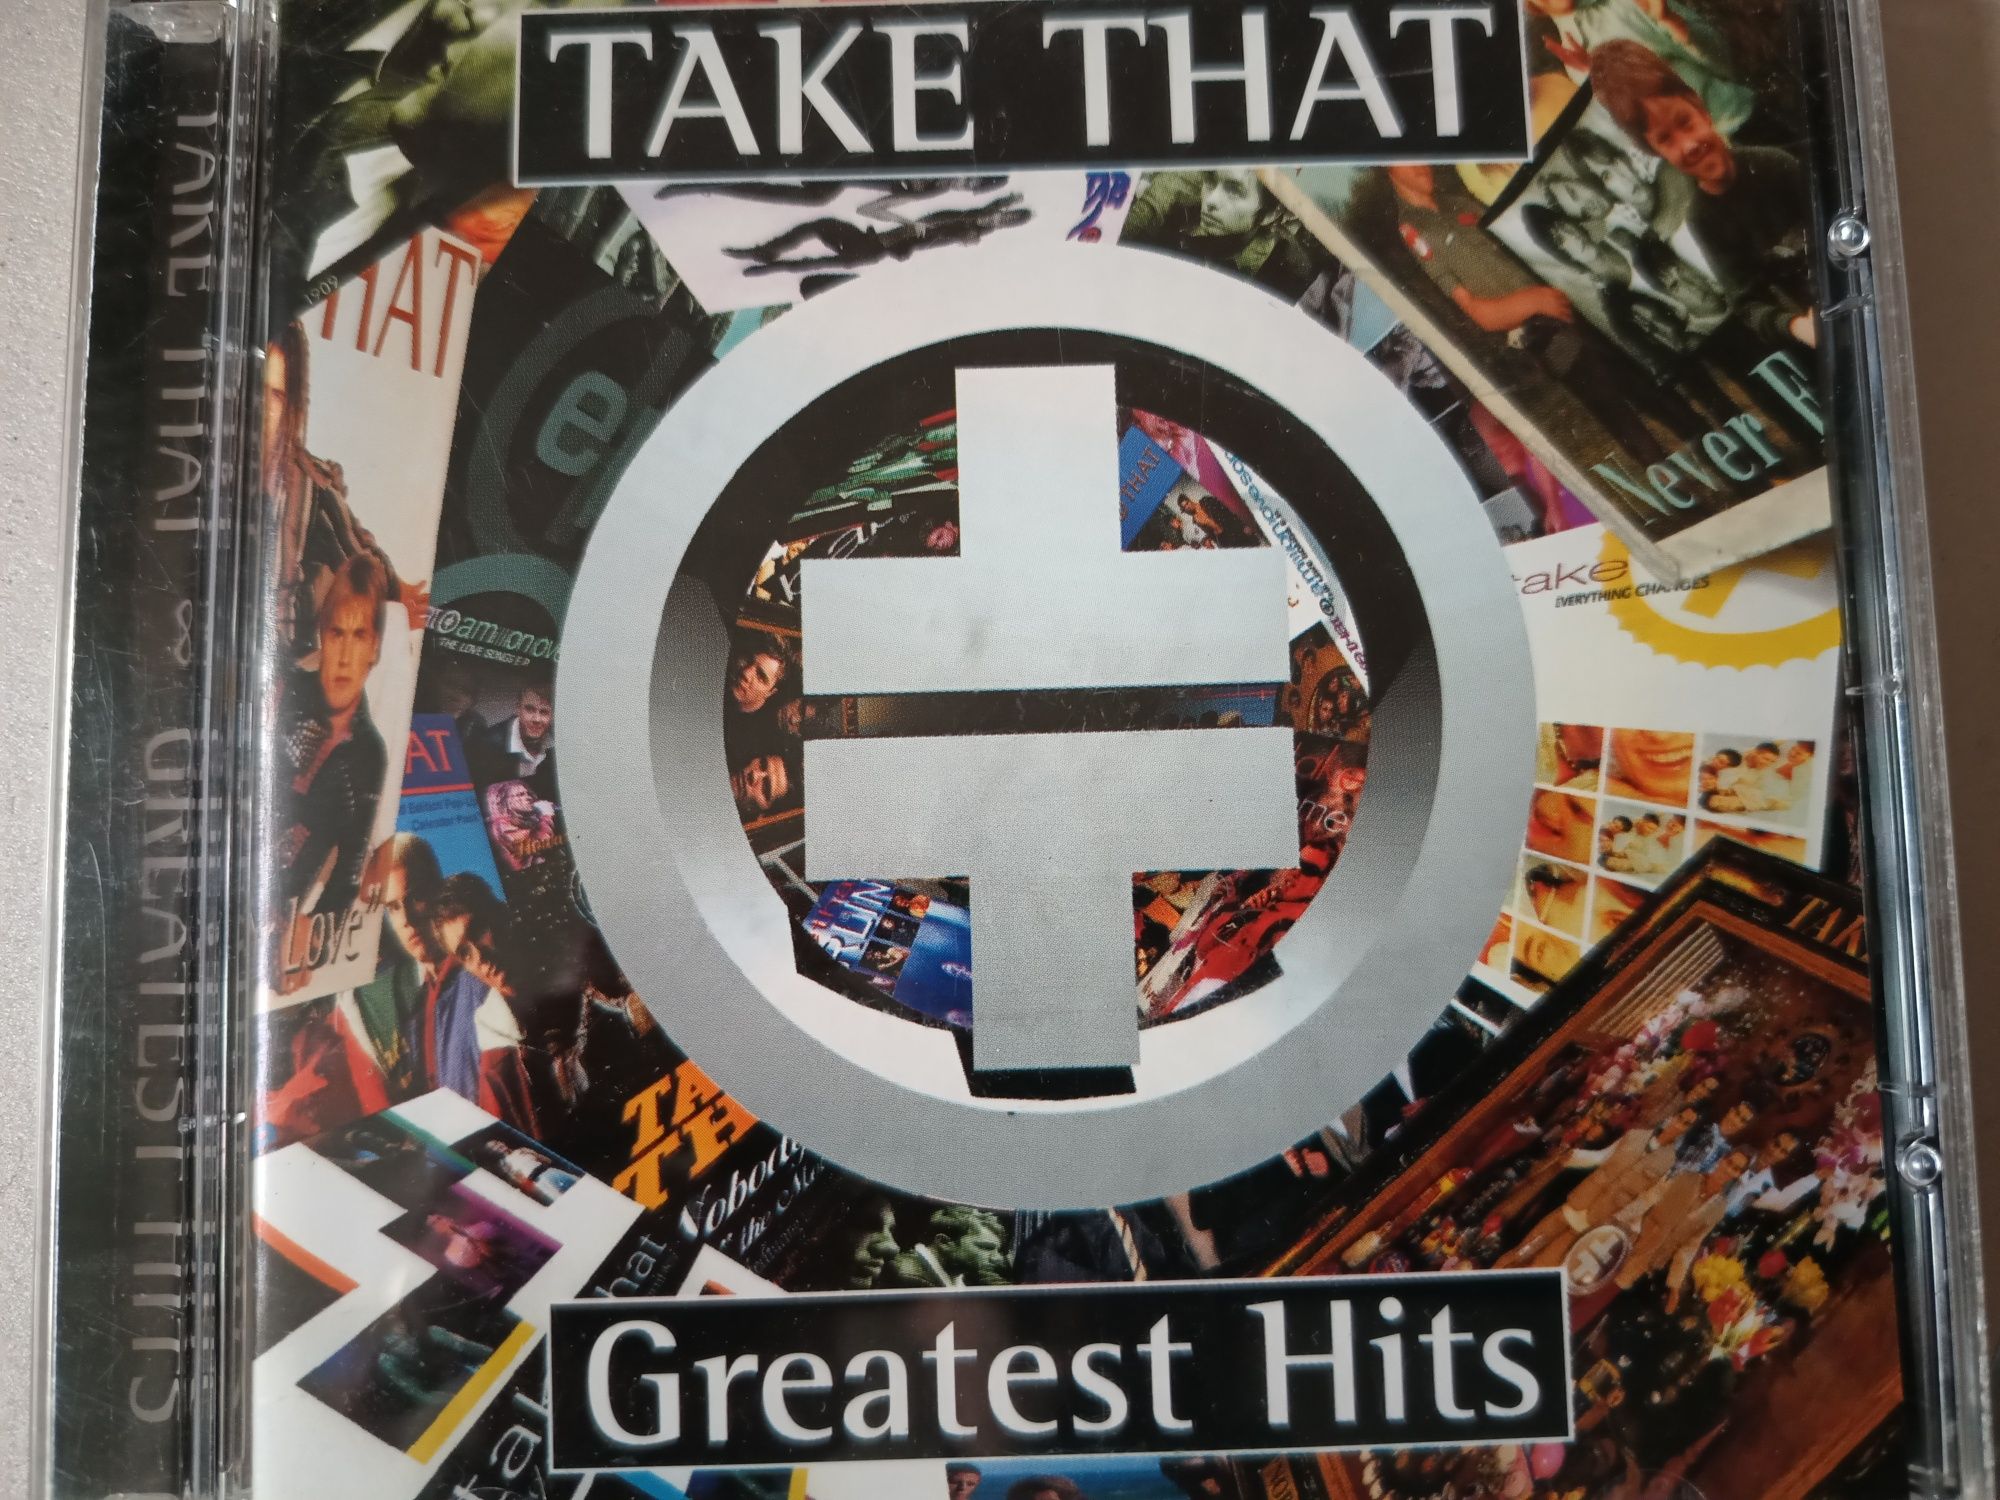 Take that -greatest hits cd